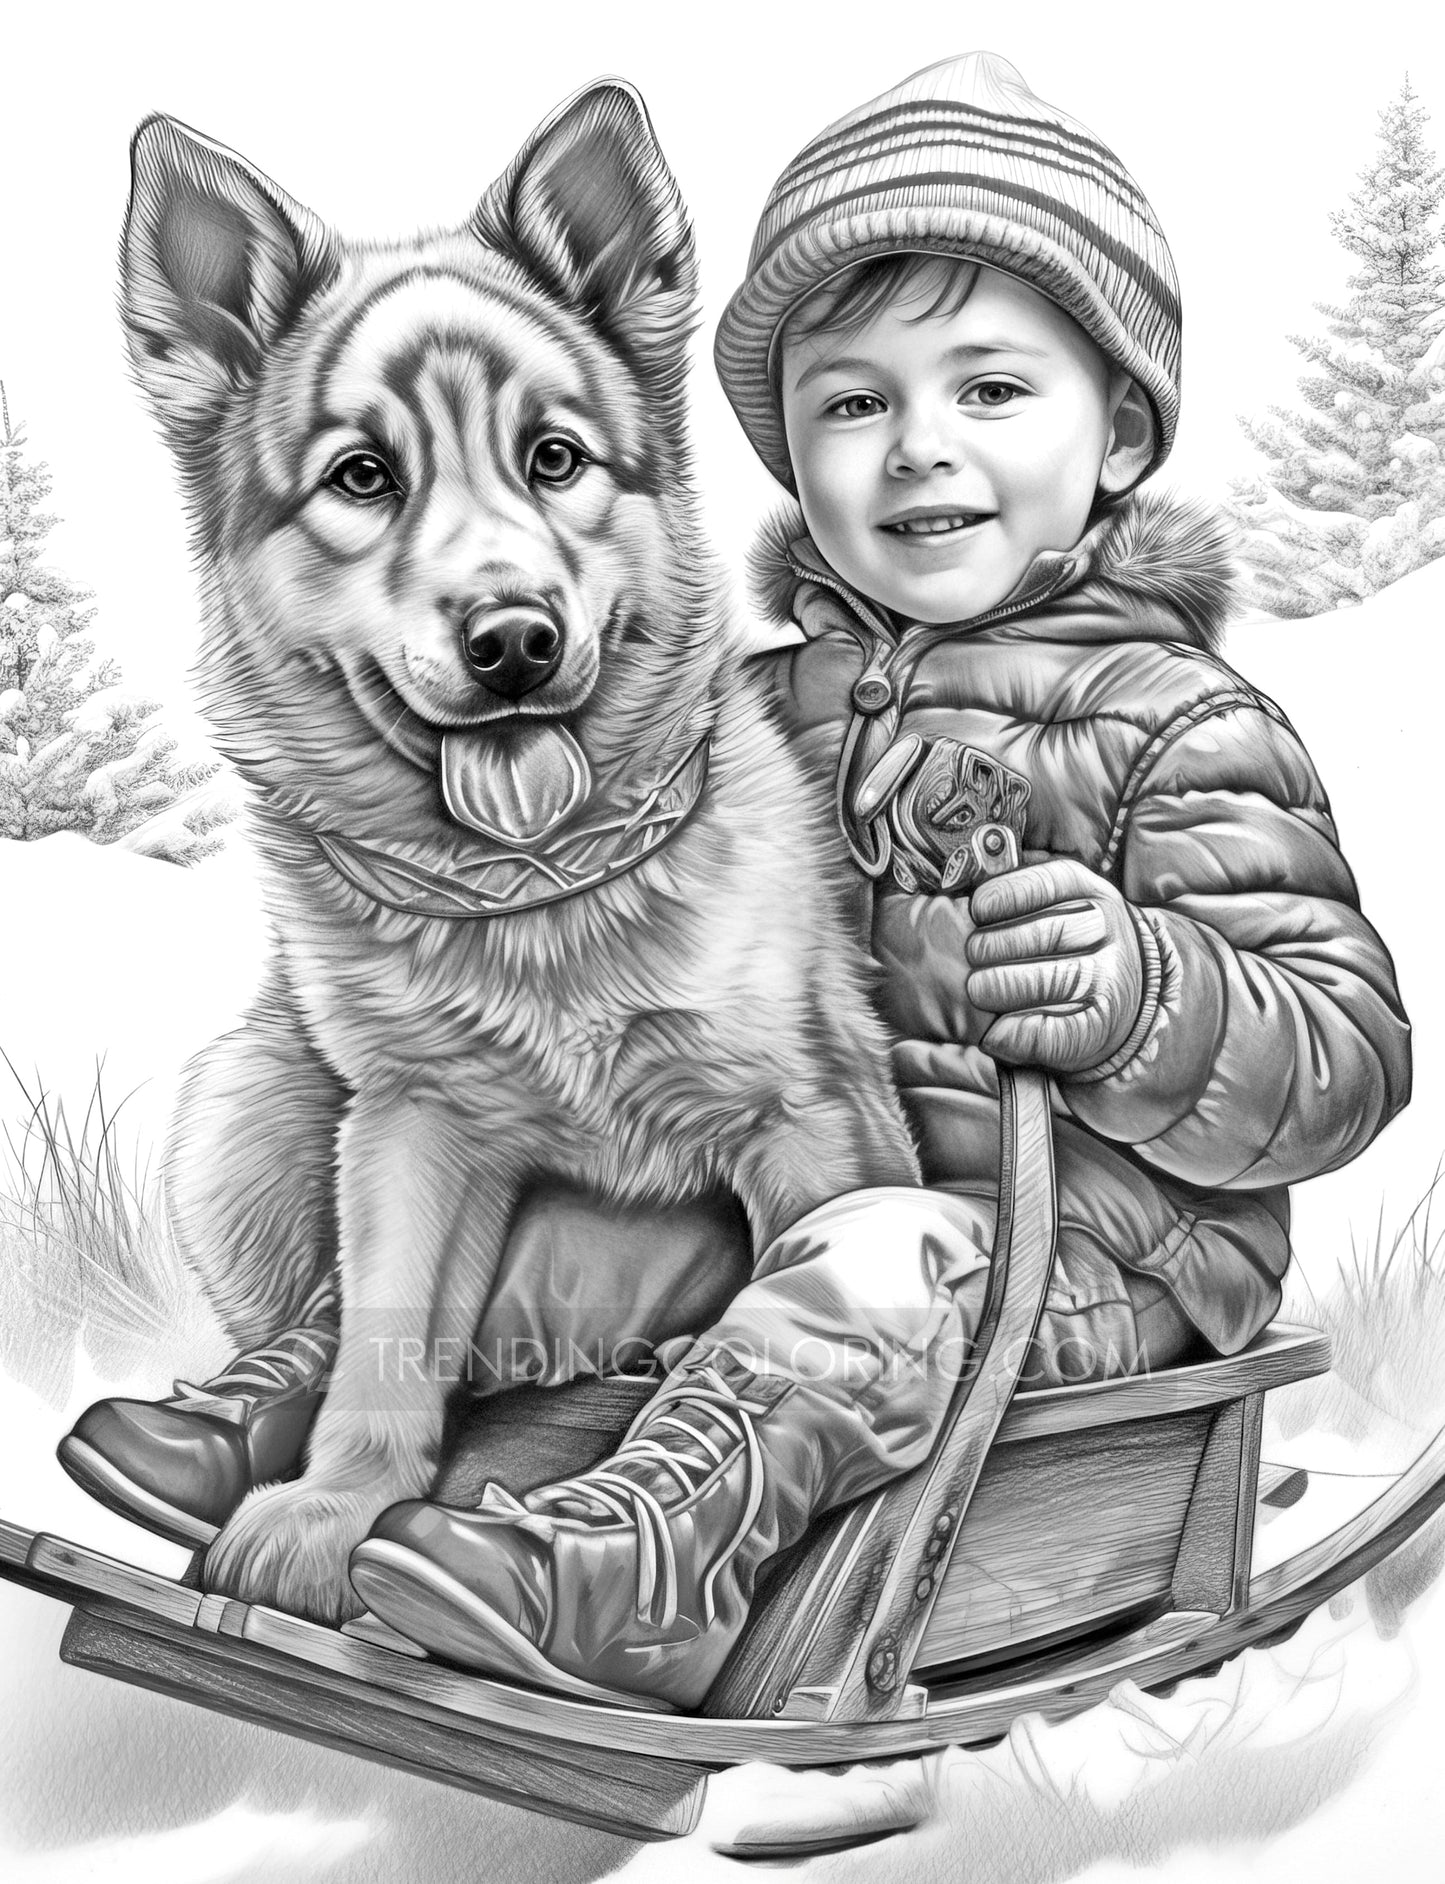 25 Baby Boy Winter Grayscale Coloring Pages - Instant Download - Printable PDF Dark/Light